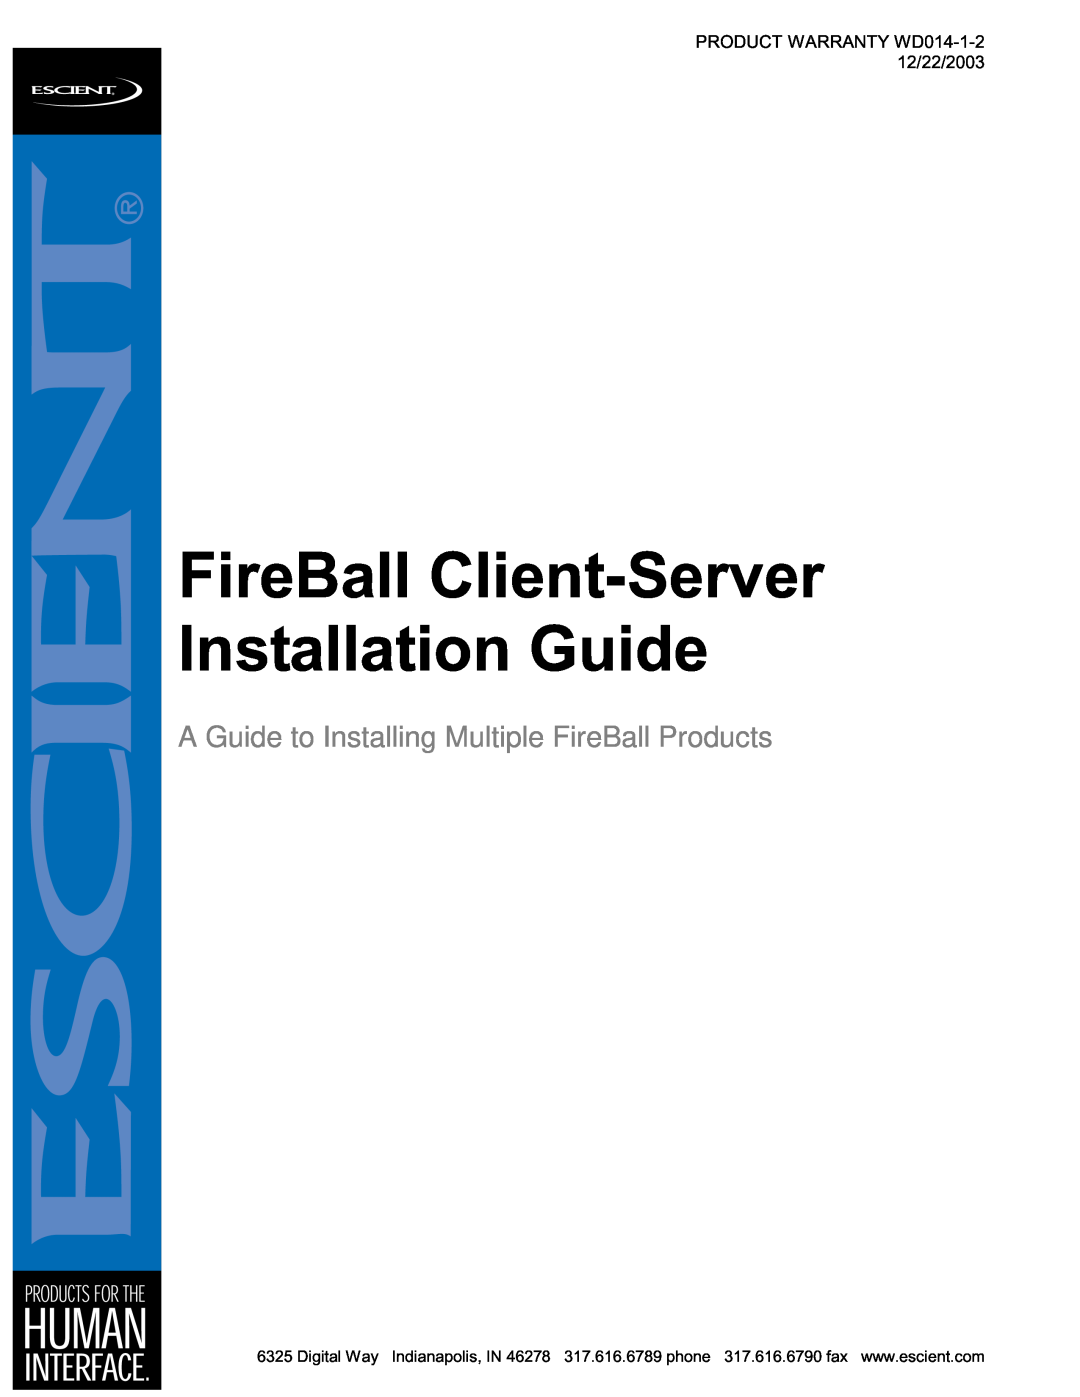 Escient MP-150 manual FireBall Client-Server Installation Guide, A Guide to Installing Multiple FireBall Products 